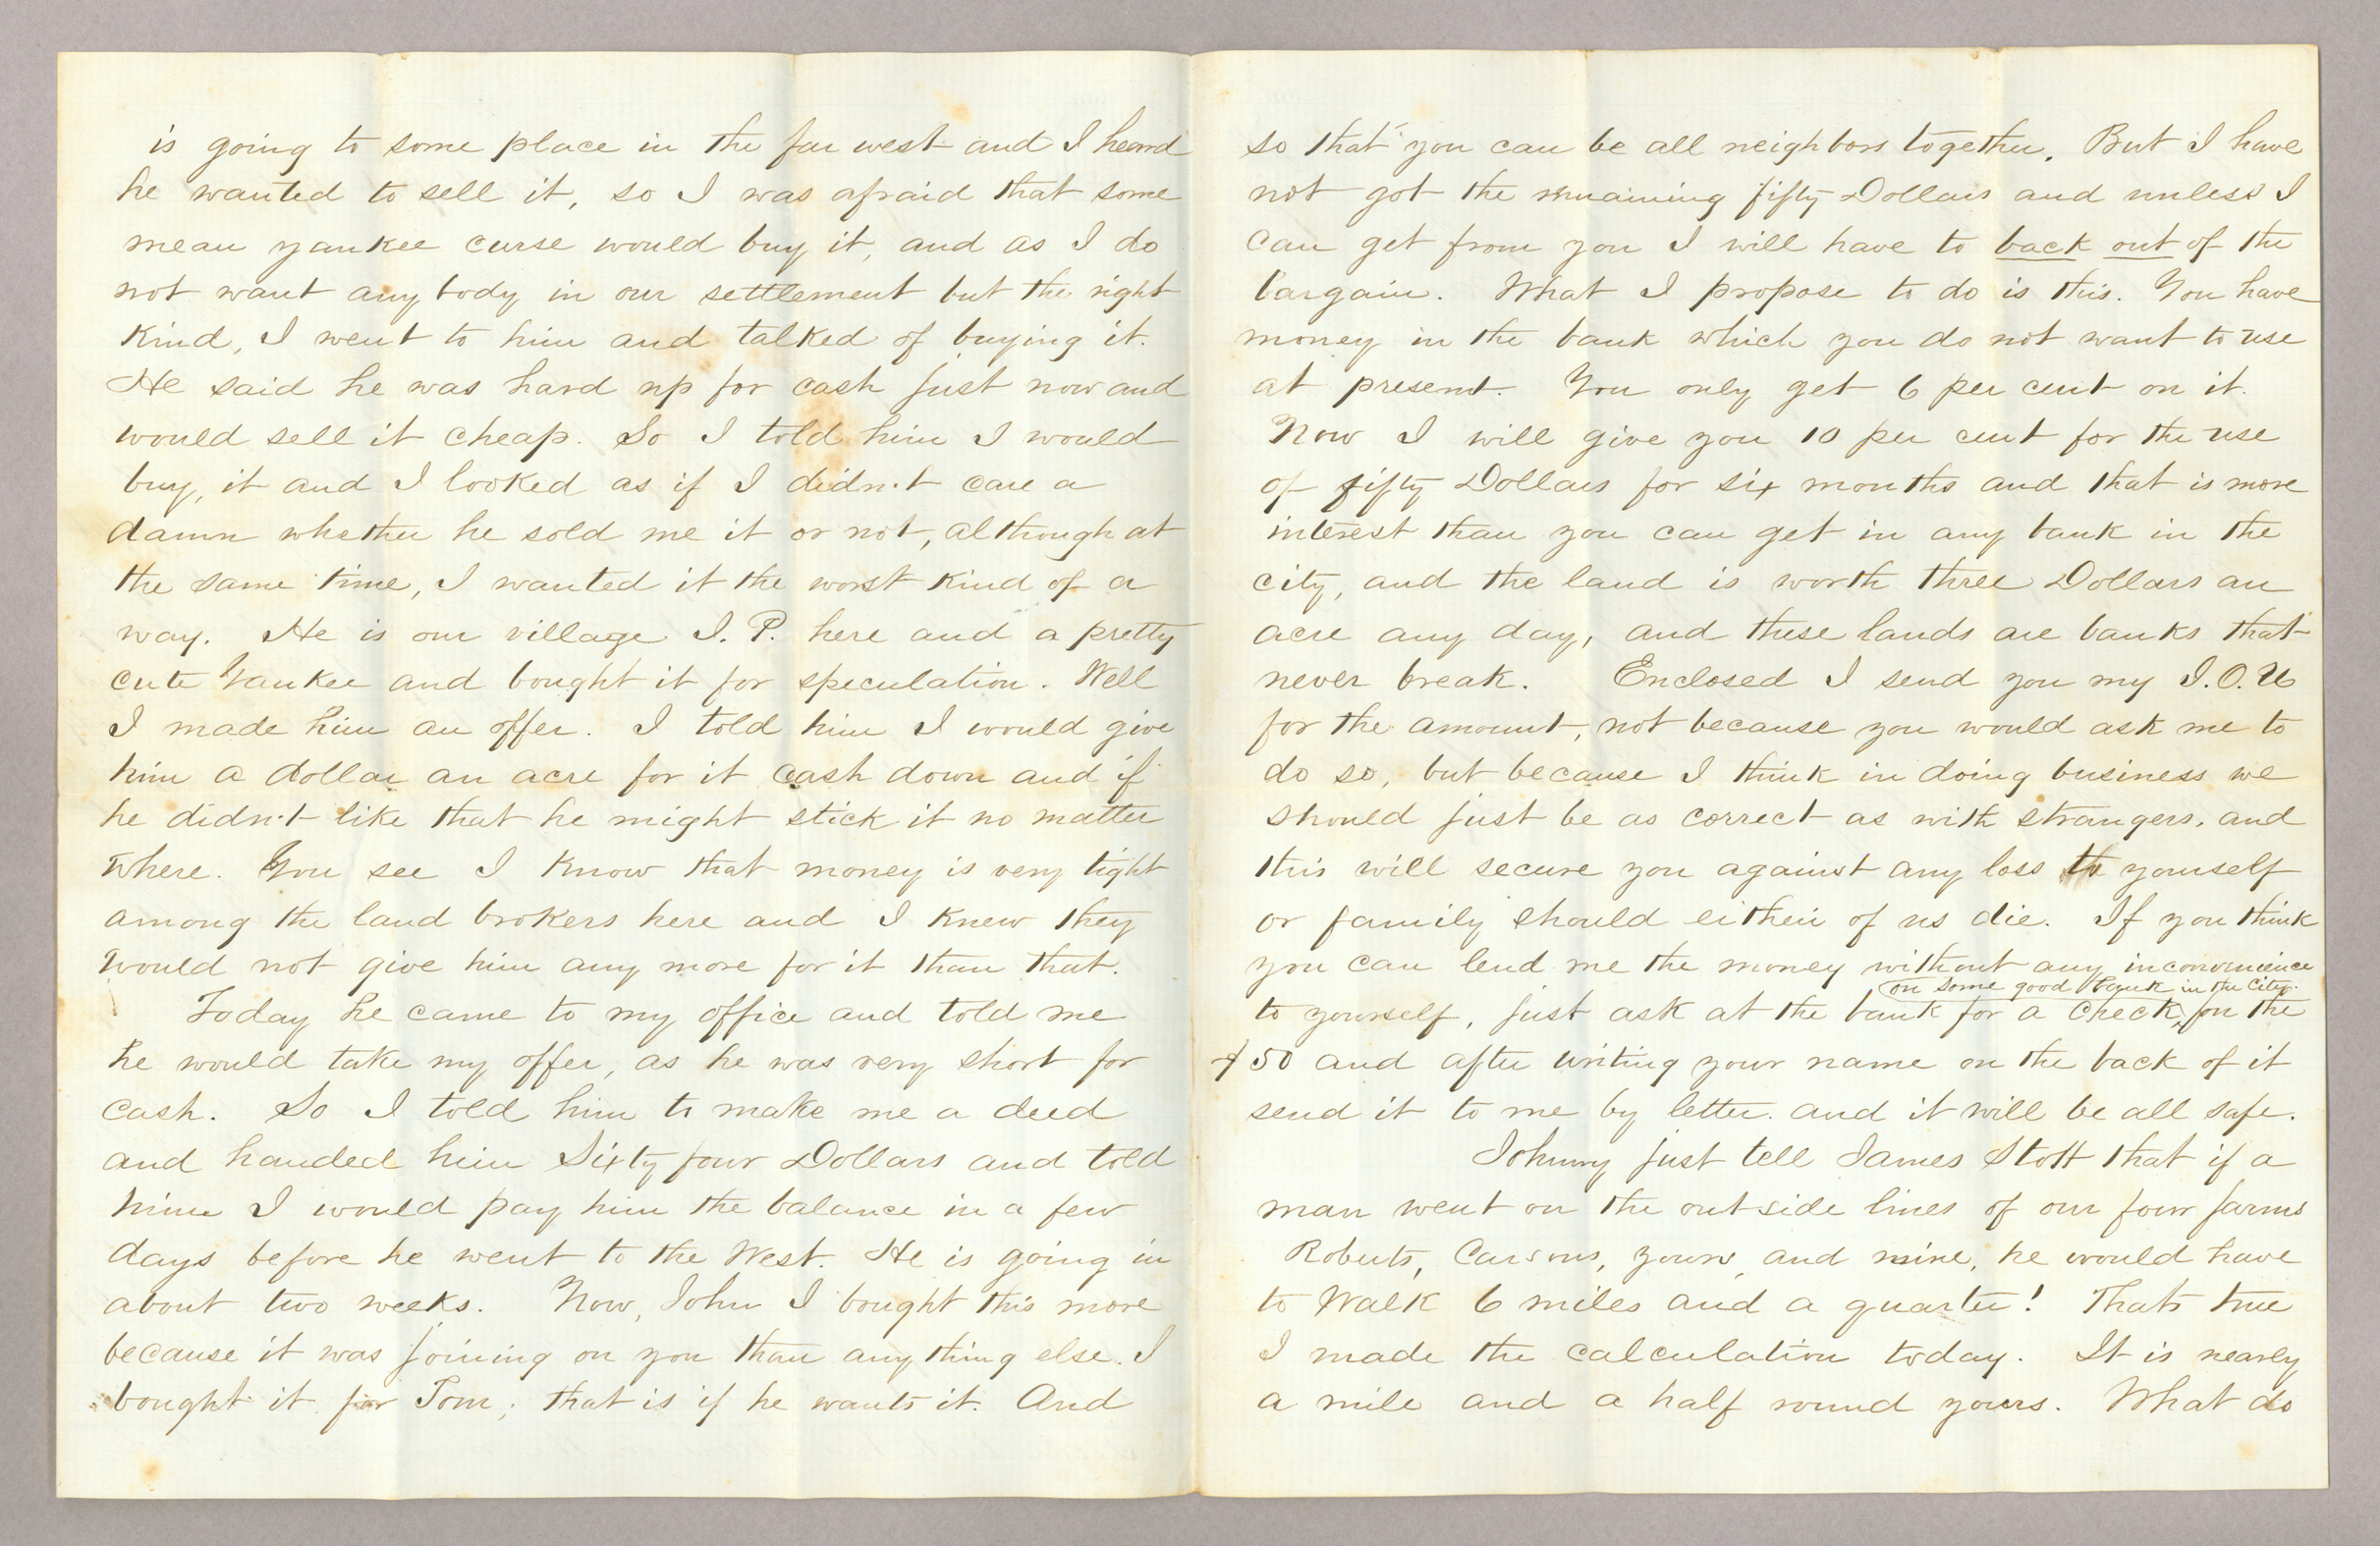 Letter. Hugh Young, Coudersport, Pennsylvania, to Jno Brownlee Esq., New York, New York, Pages 2-3